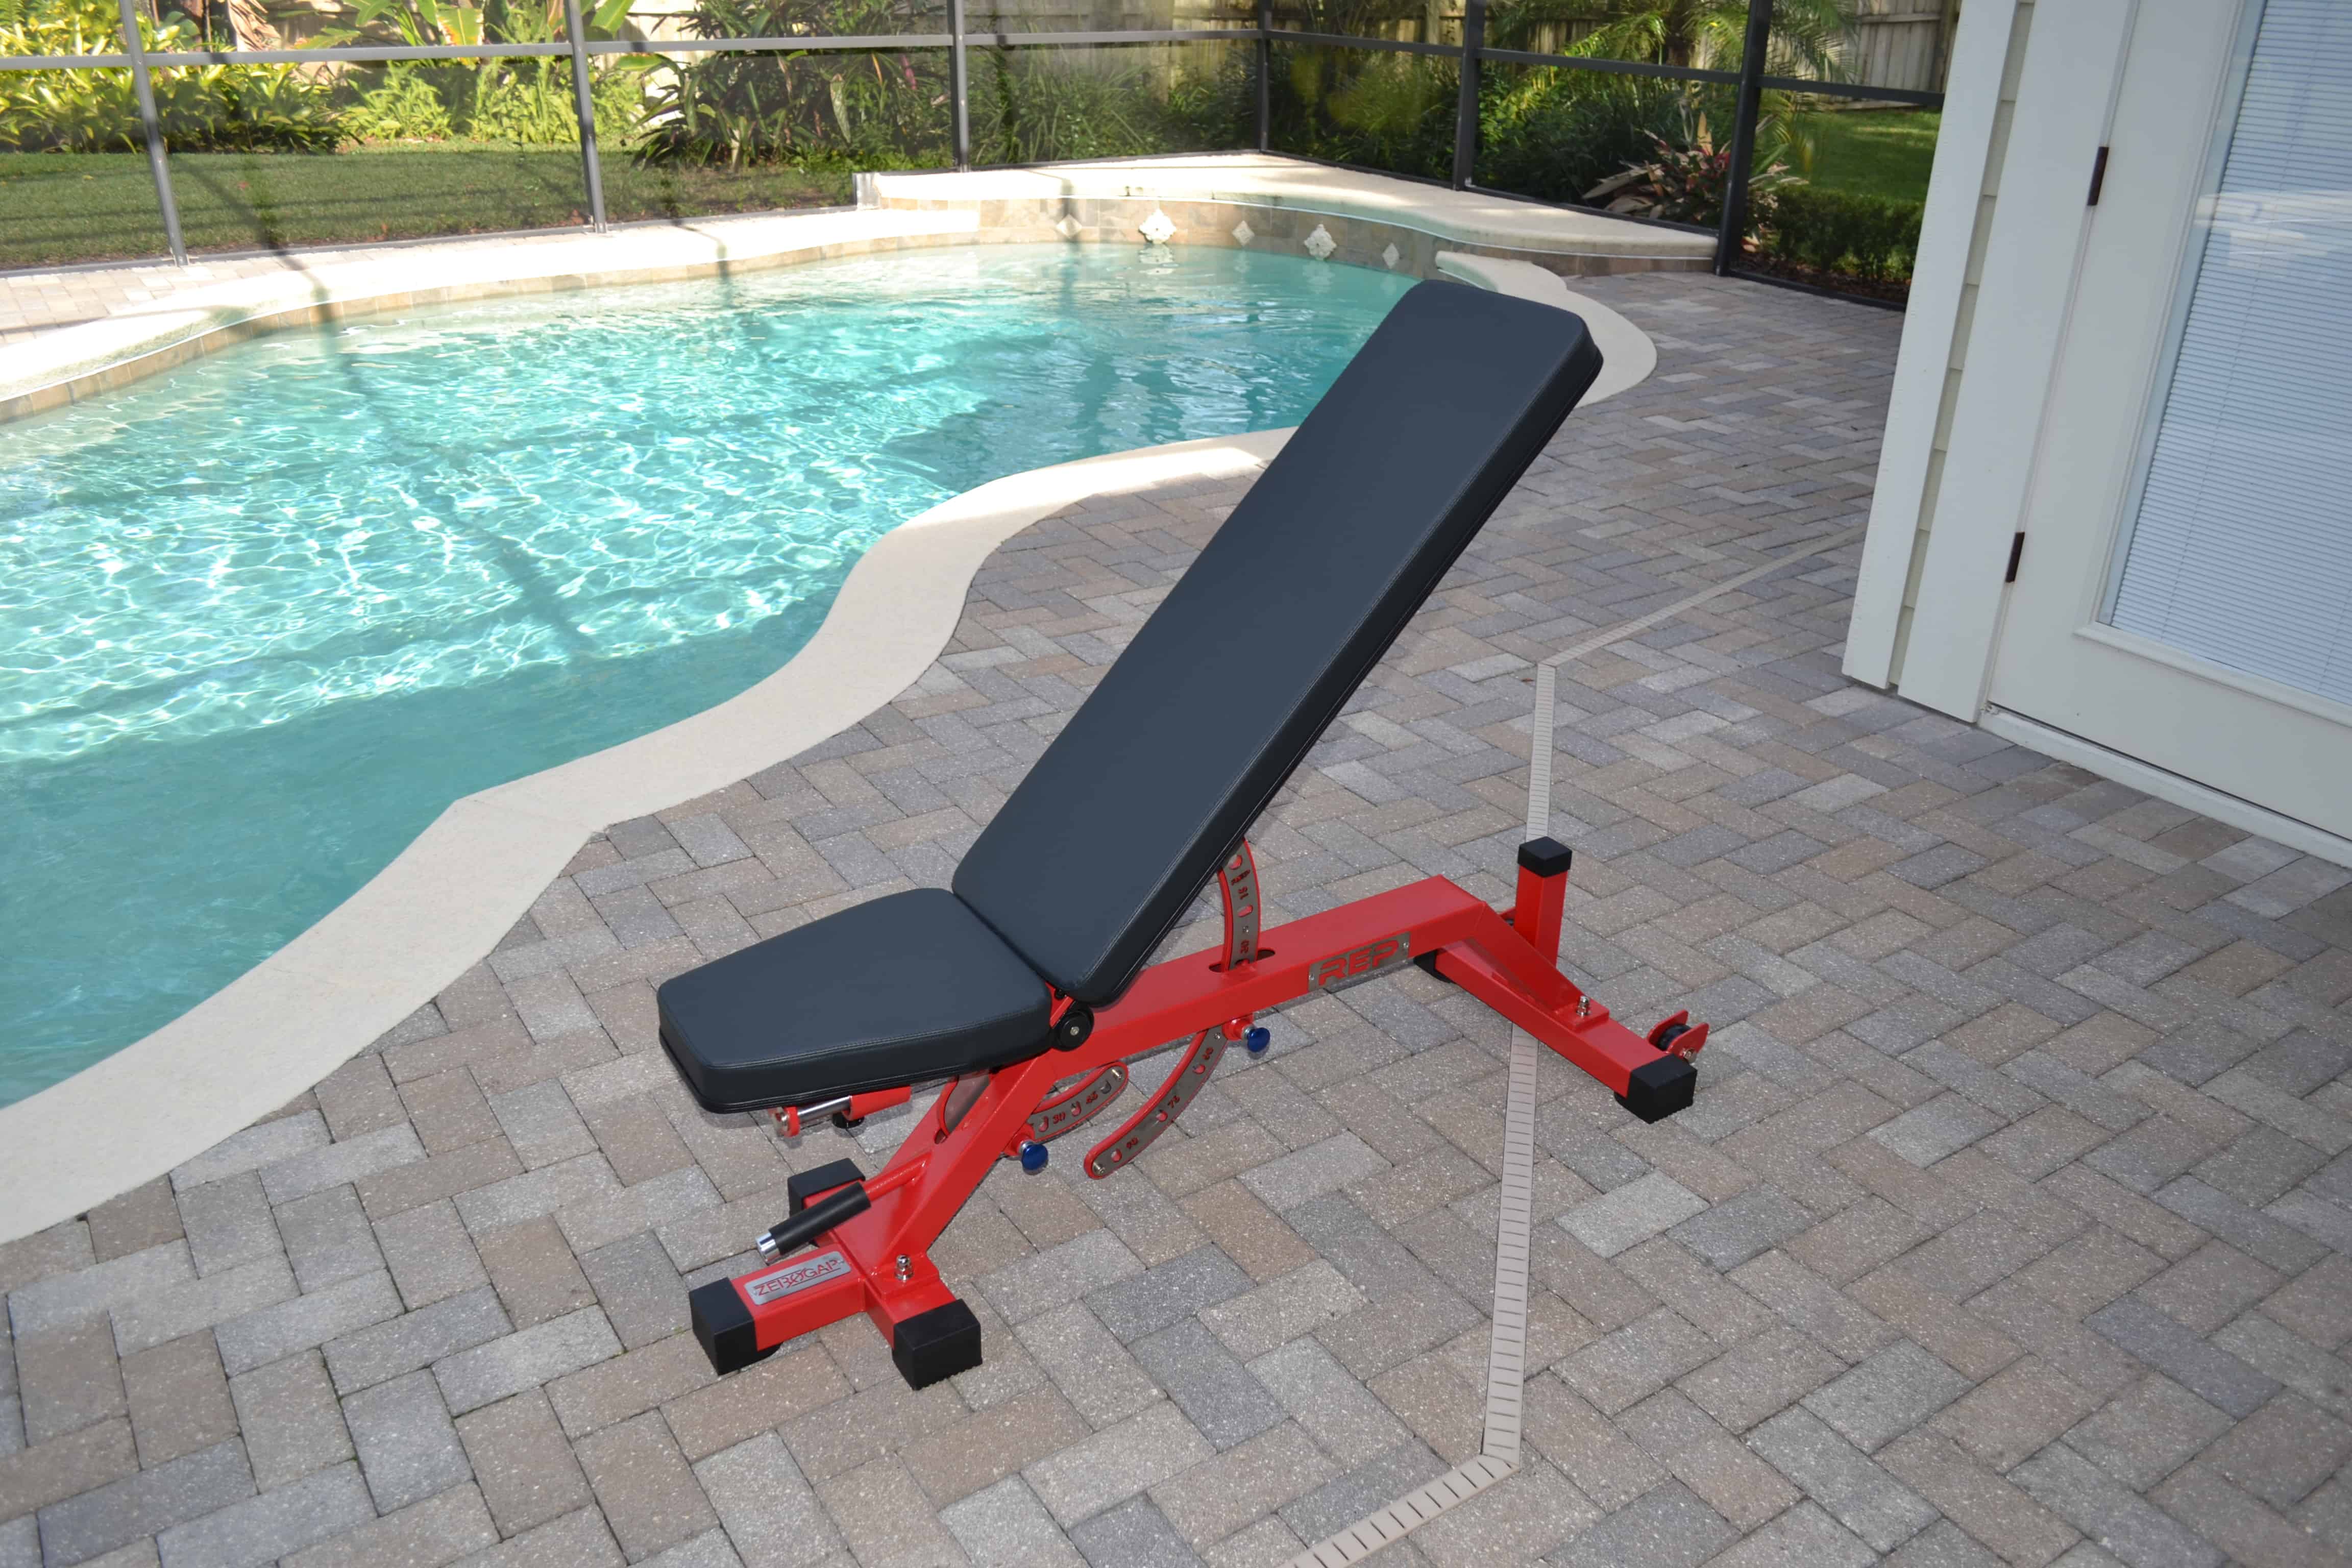 REP AB-5000 Adjustable FID Bench - the best FID bench for home gym or garage gym.